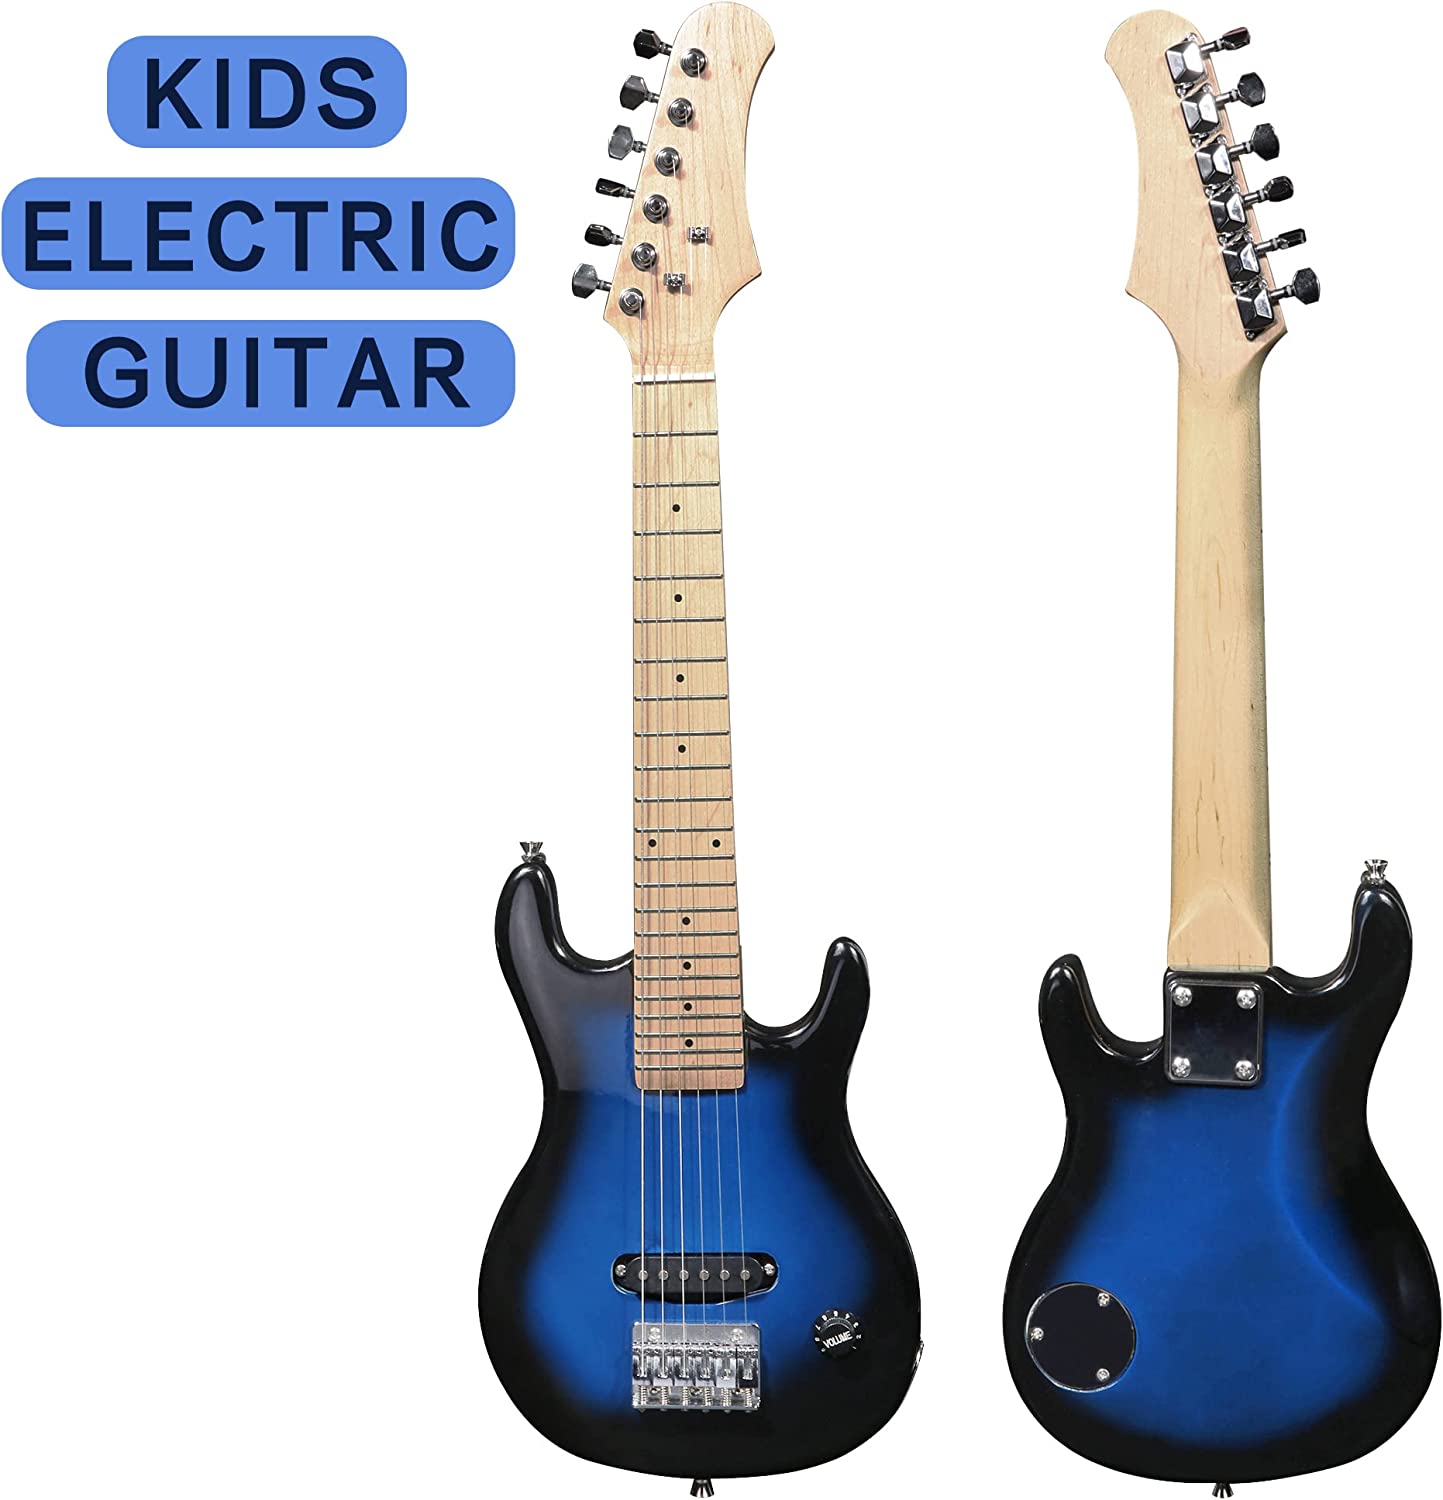 30" Electric Guitar Beginner Kits for Starter Guitar Includes Gig Bag, 5 W Amplifier, 6 Strings, Picks, Cable